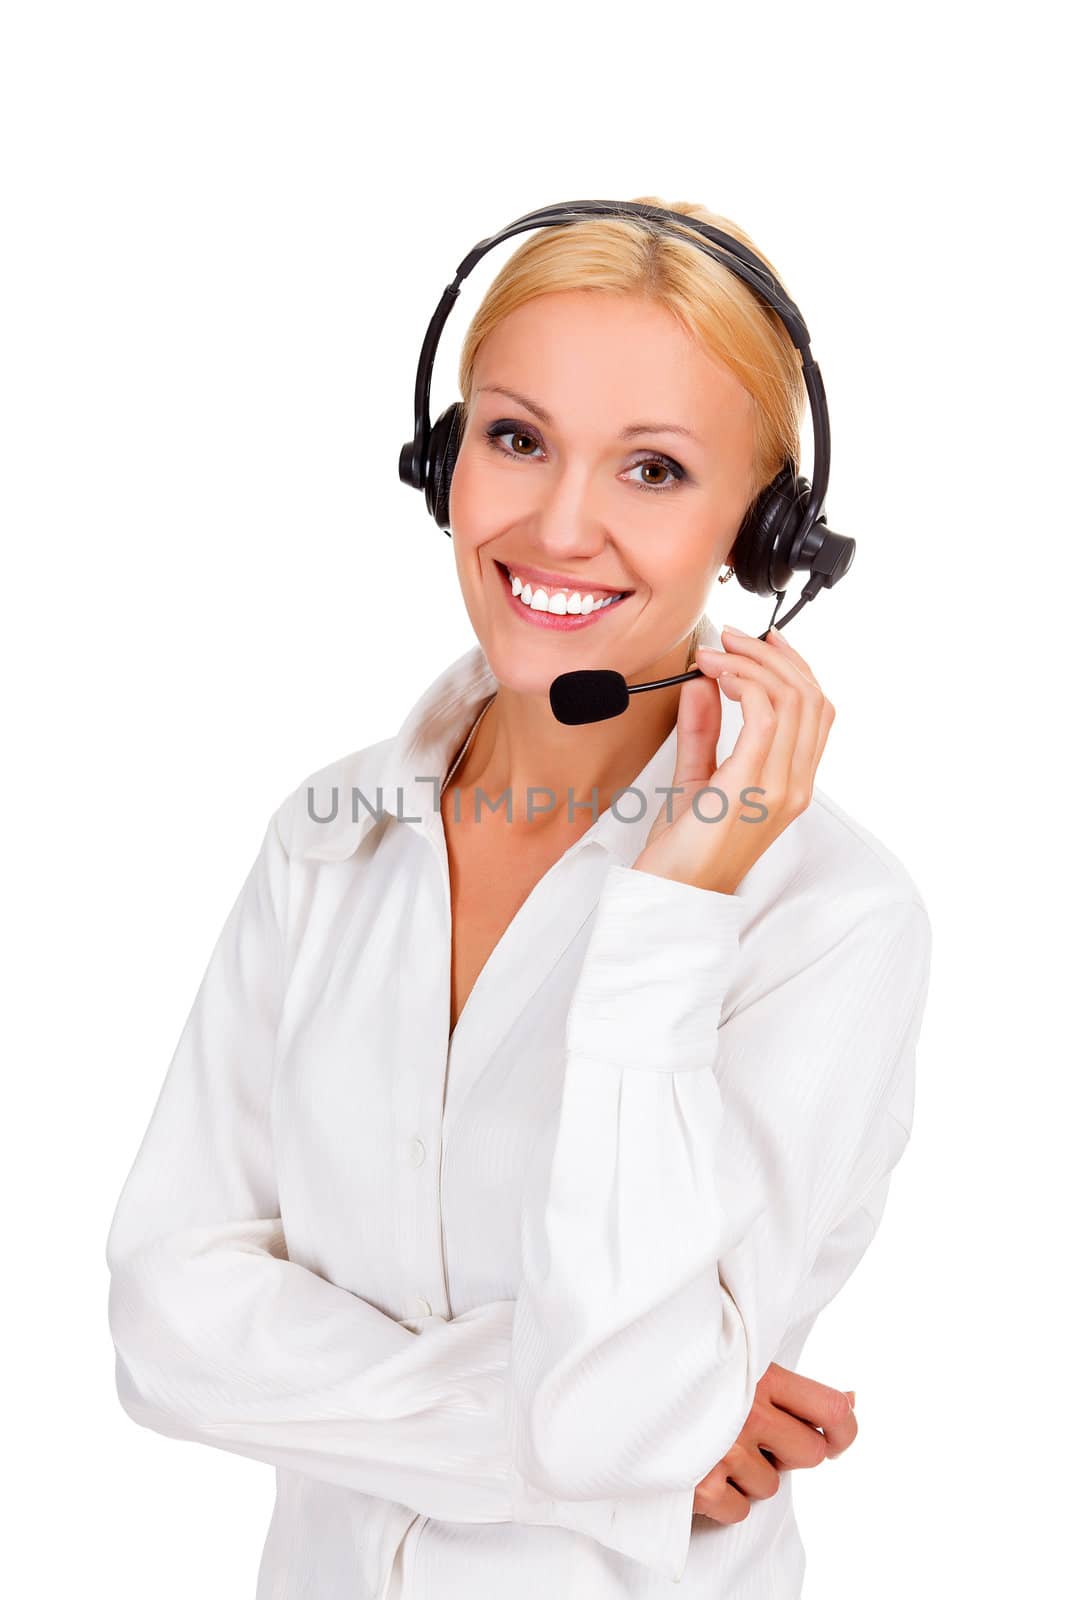 Happy woman with headset and smiling, isolated over a white backgorund